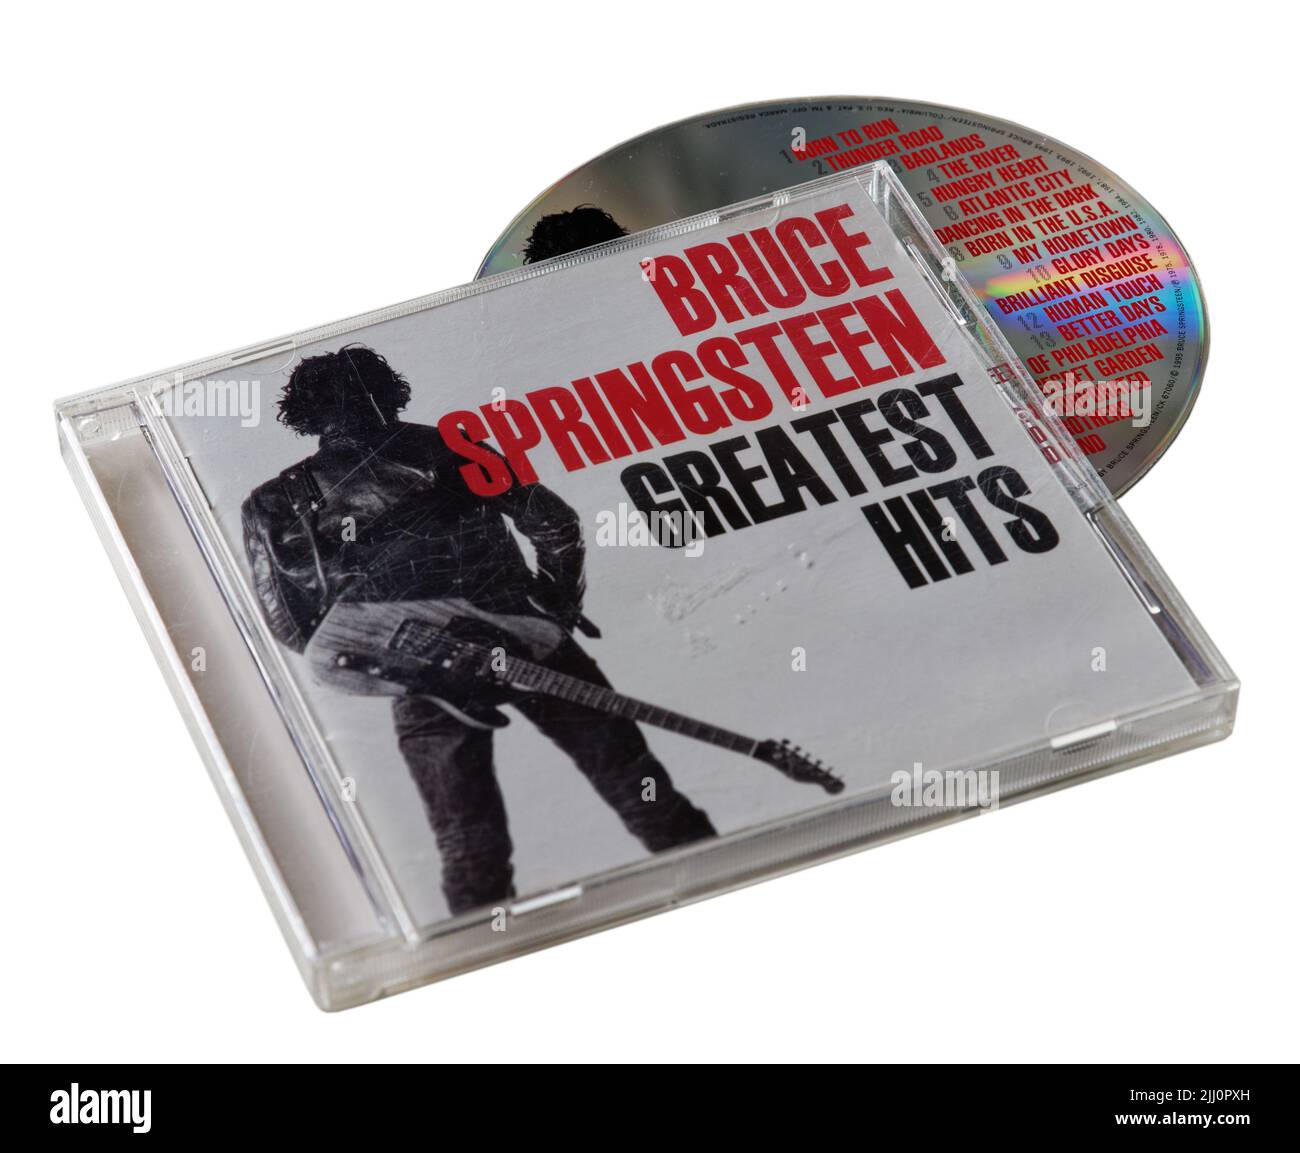 Bruce Springsteen Greatest Hits CD Stock Photo